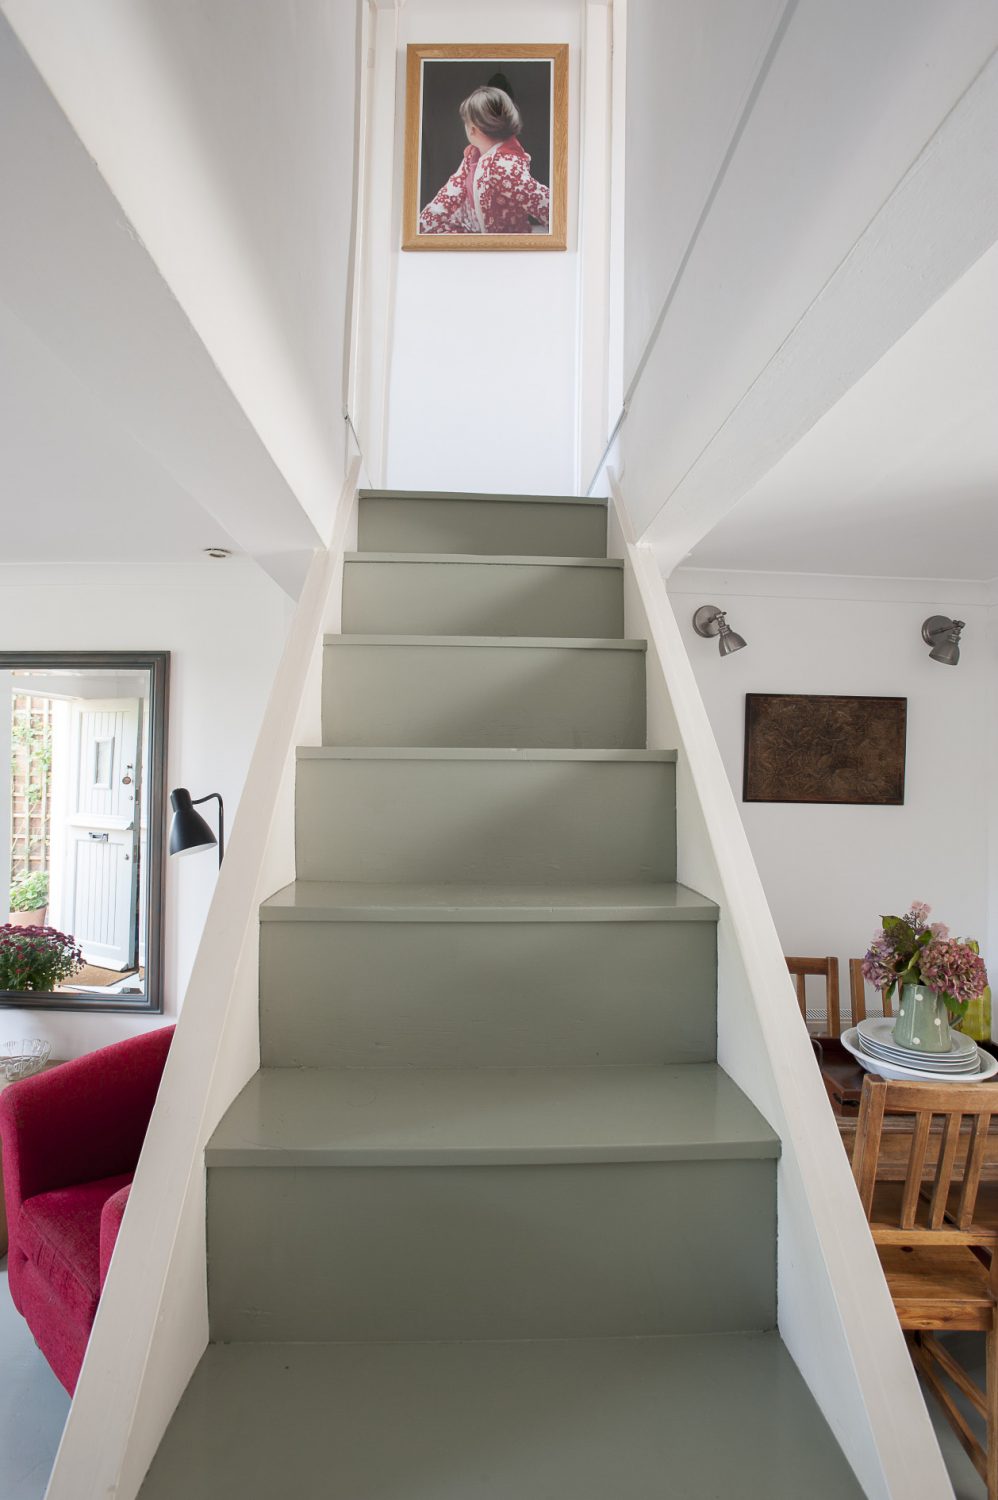 The staircase in the centre of the living room leads to the two upstairs bedrooms